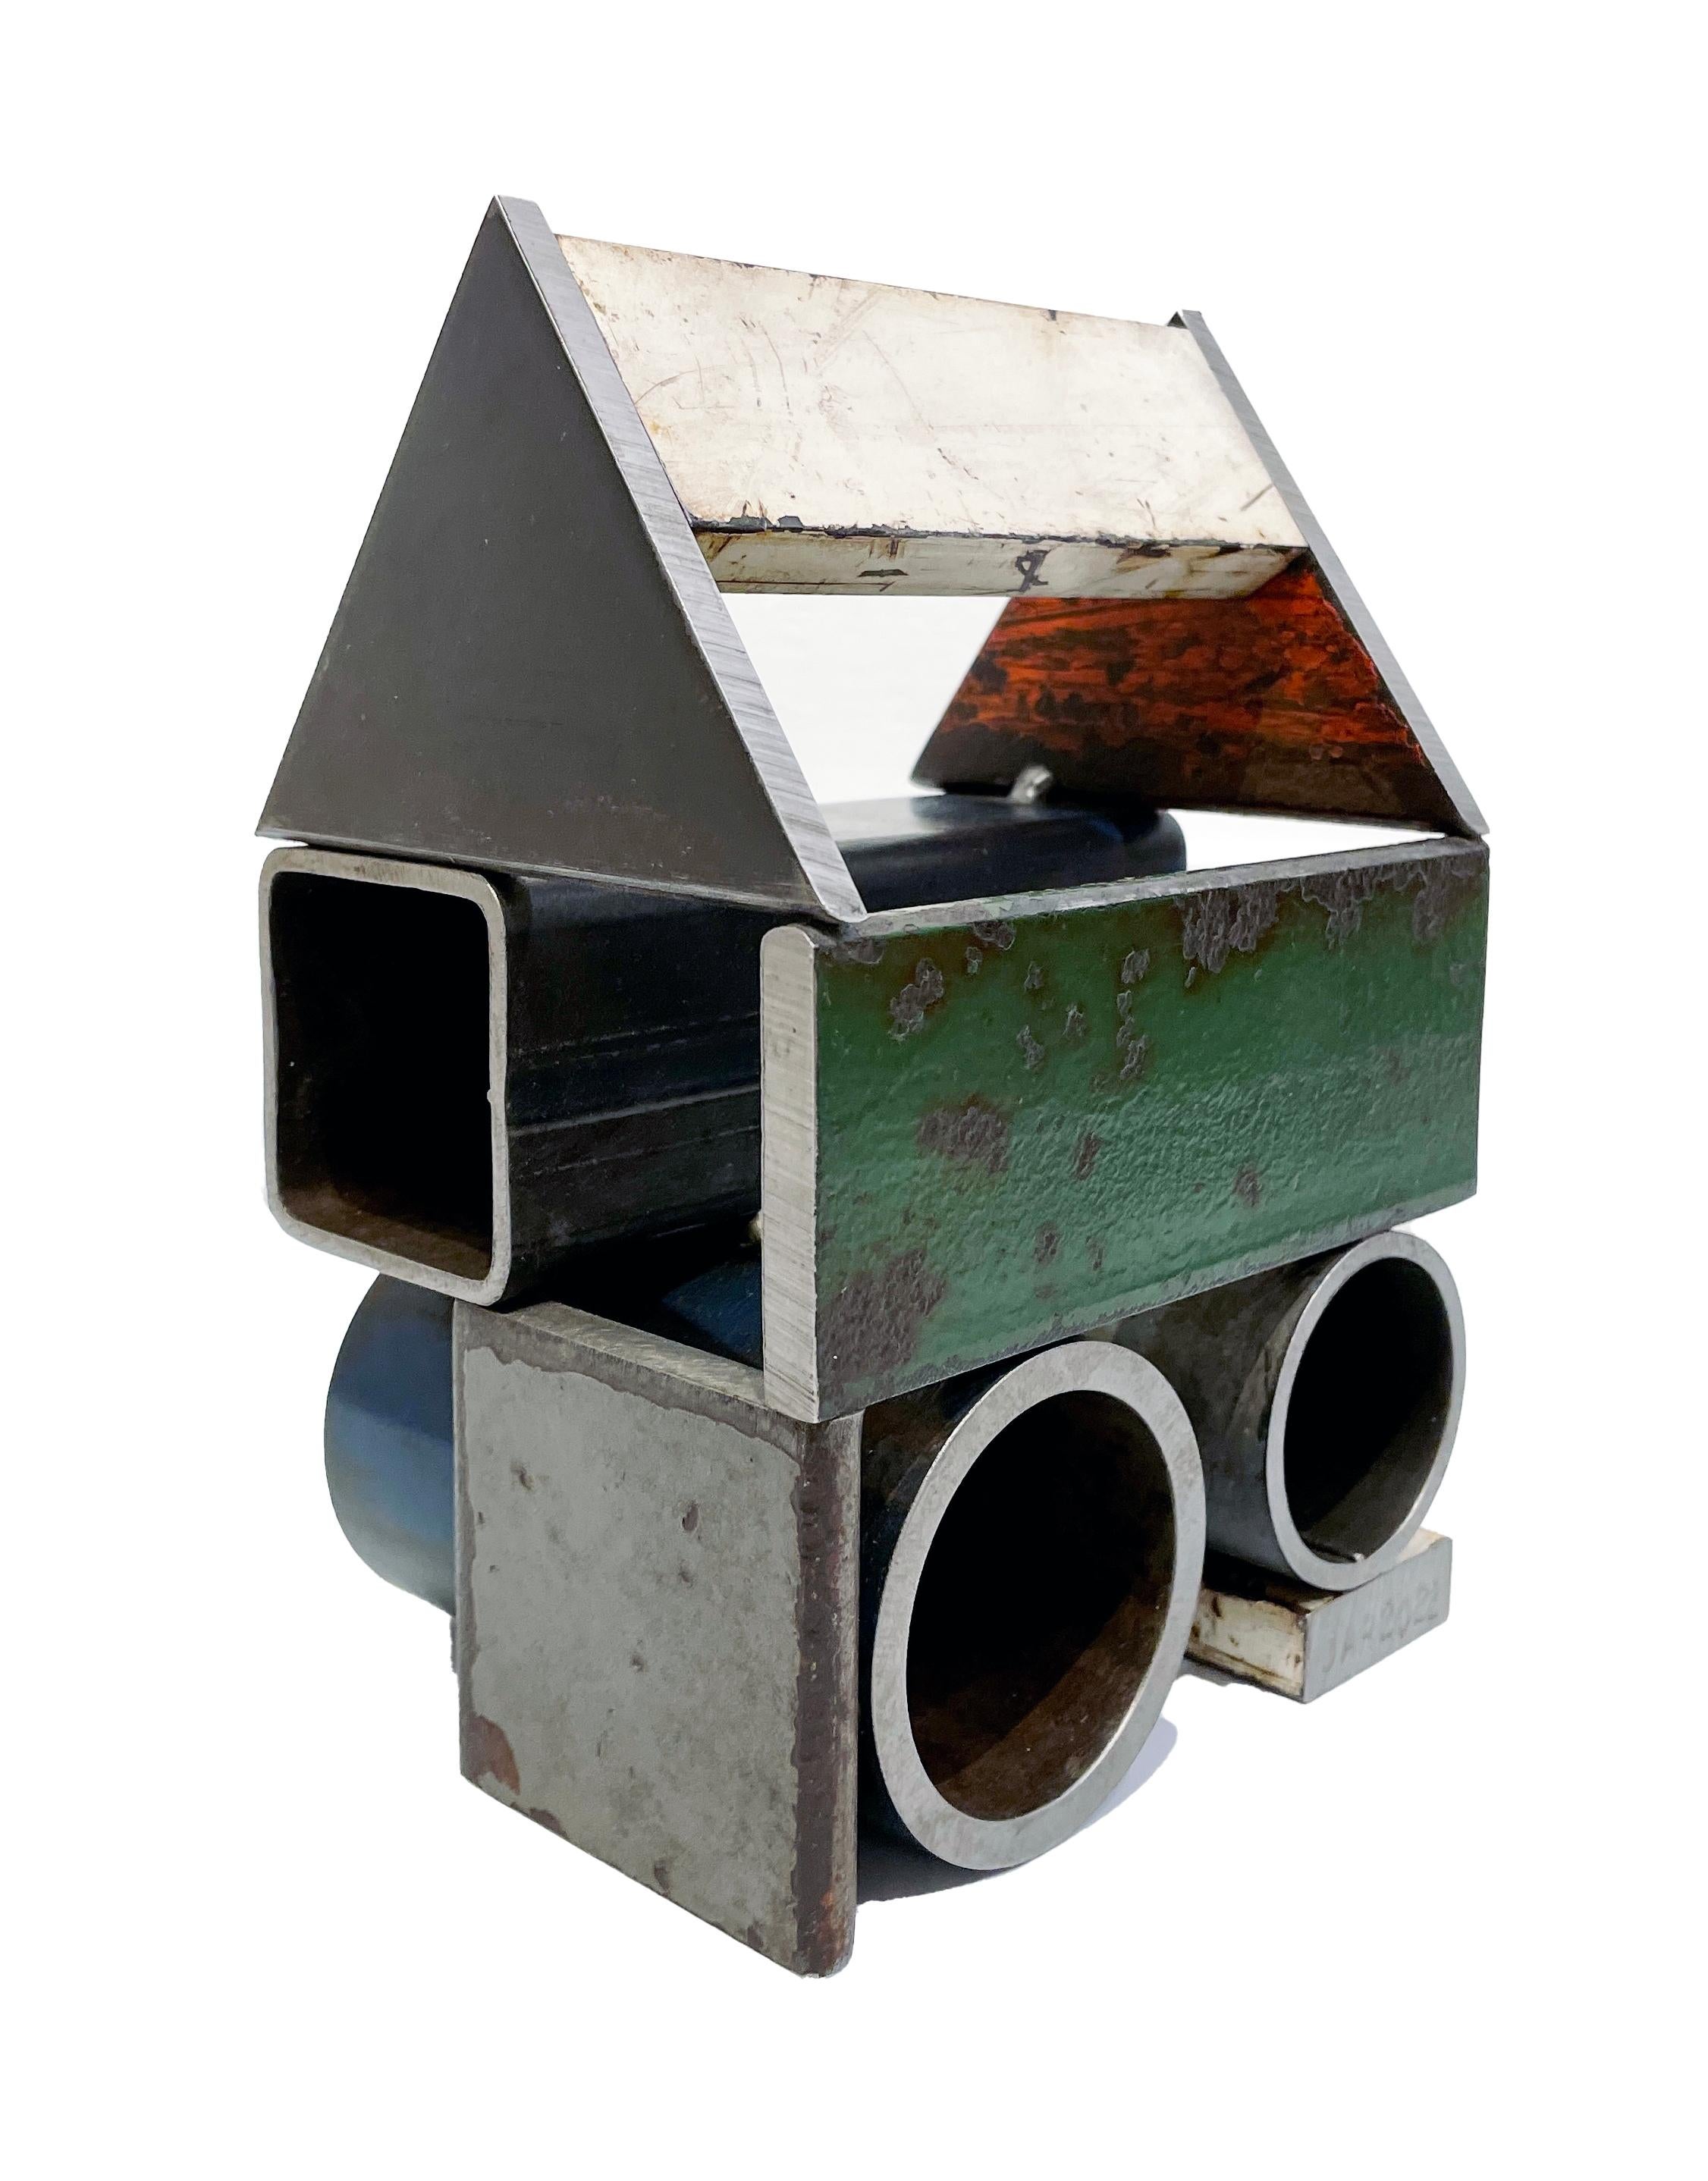 This is a welded steel sculpture made by furniture creator Jim Rose. It is sustainable design created from salvaged and recycled steel panels left over from his larger projects. These sculptures reference traditional American Folk Art barn house